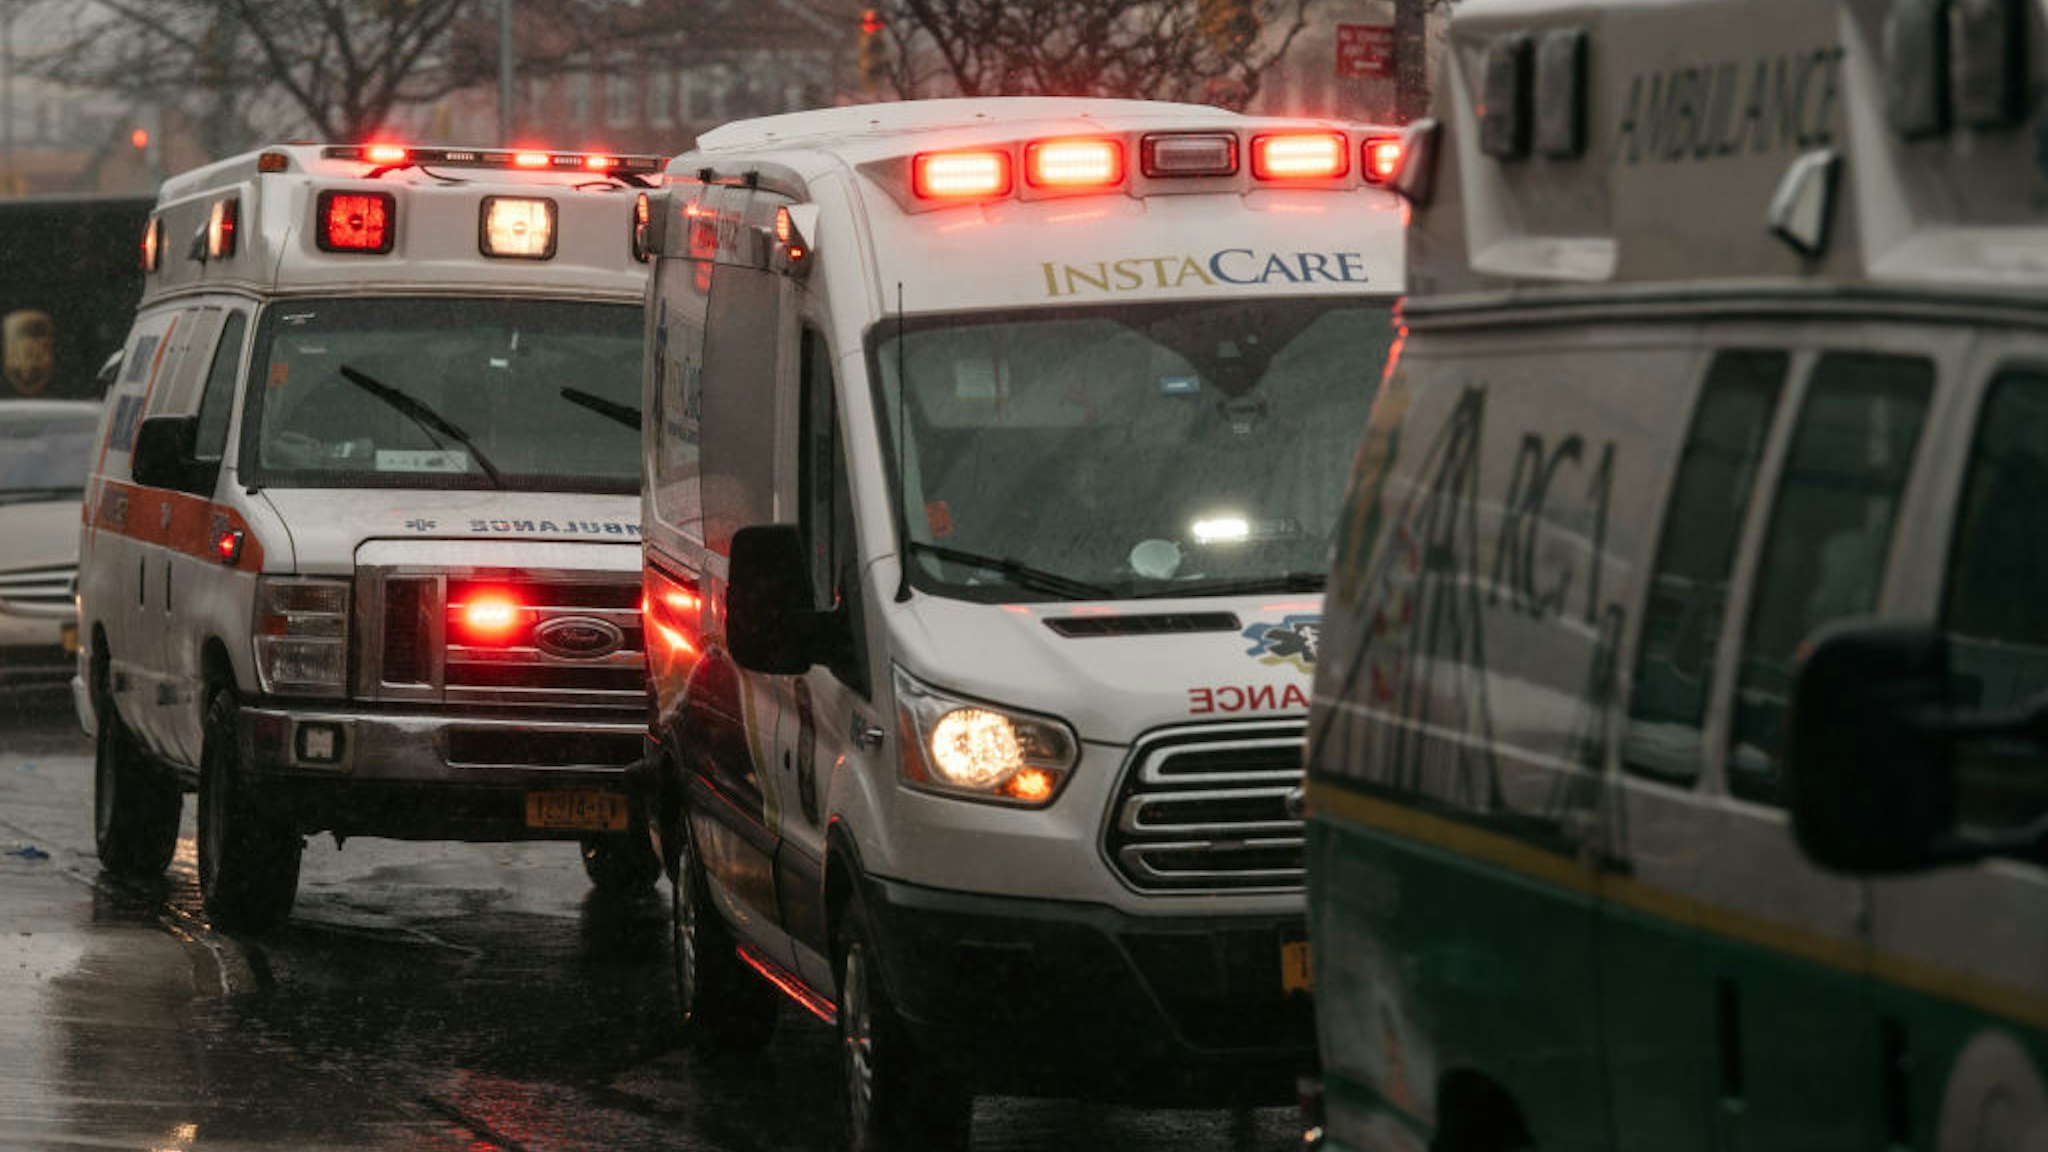 Parked ambulances continue to flash their lights near Brookdale Hospital Medical Center in Brooklyn on April 13, 2020 in New York City.